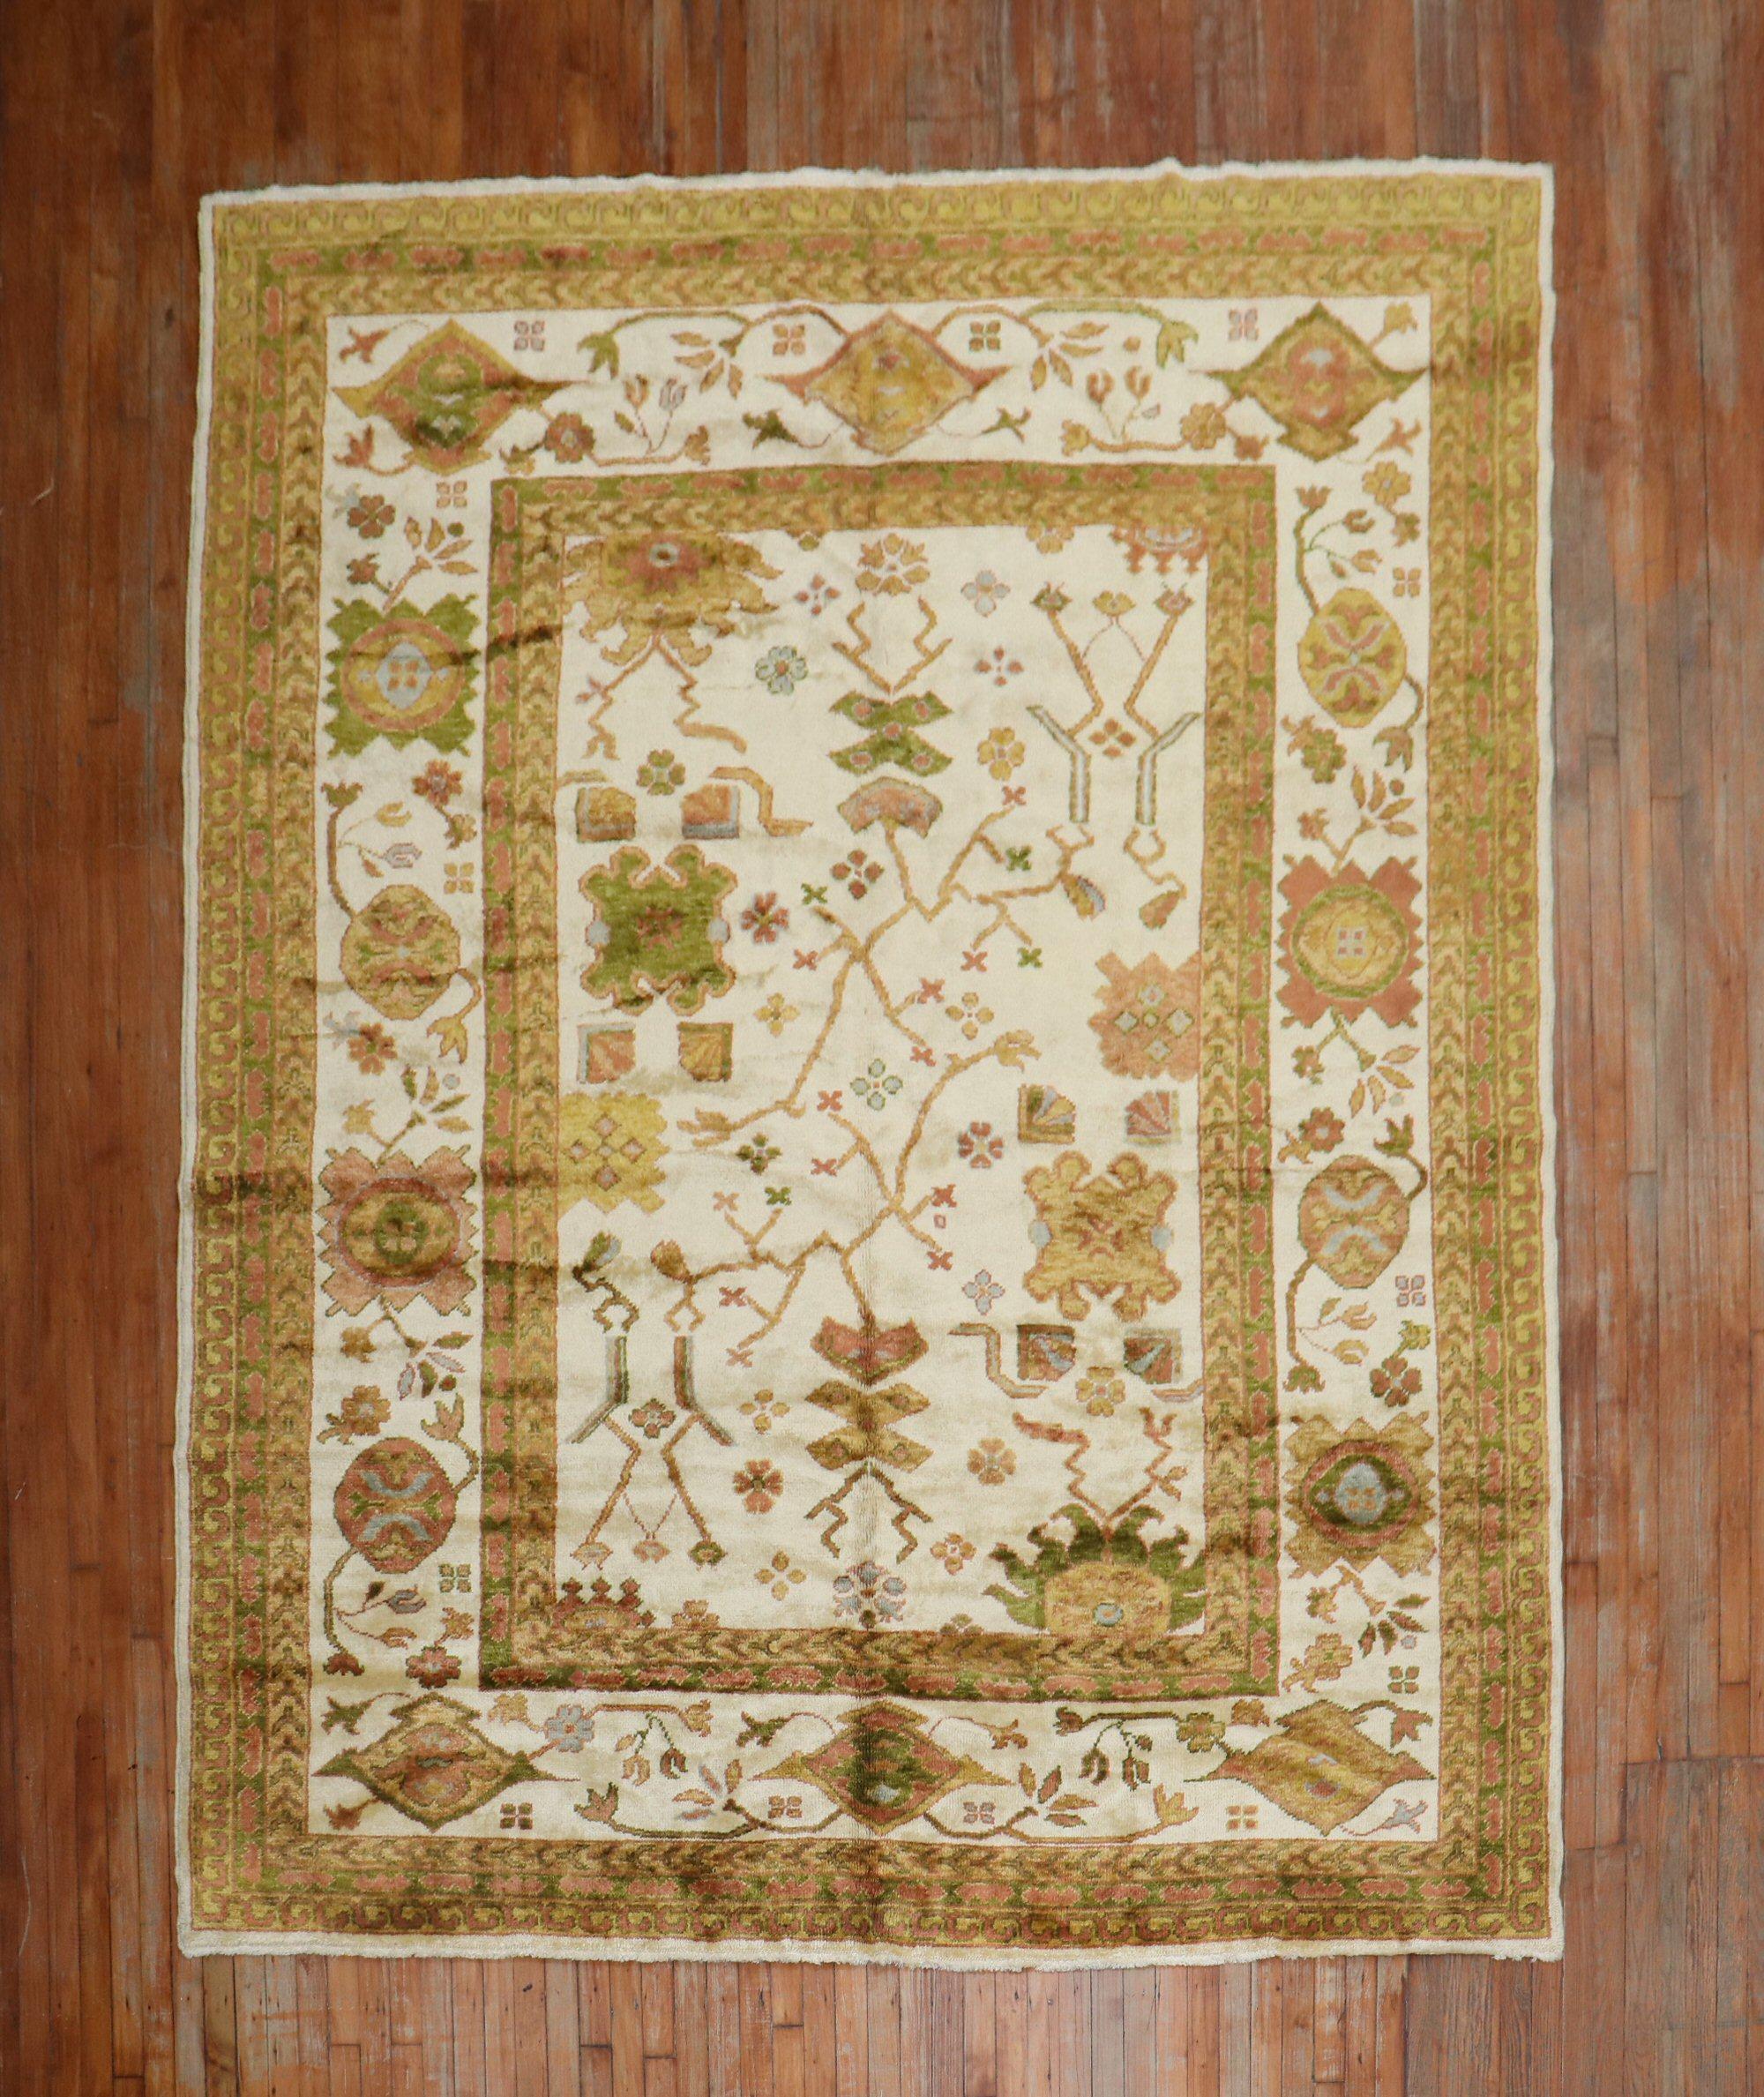 A One of a kind Turkish Oushak rug with olive accent colors on an ivory ground woven with angora wool

Measures: 8'2'' x 10'3''.